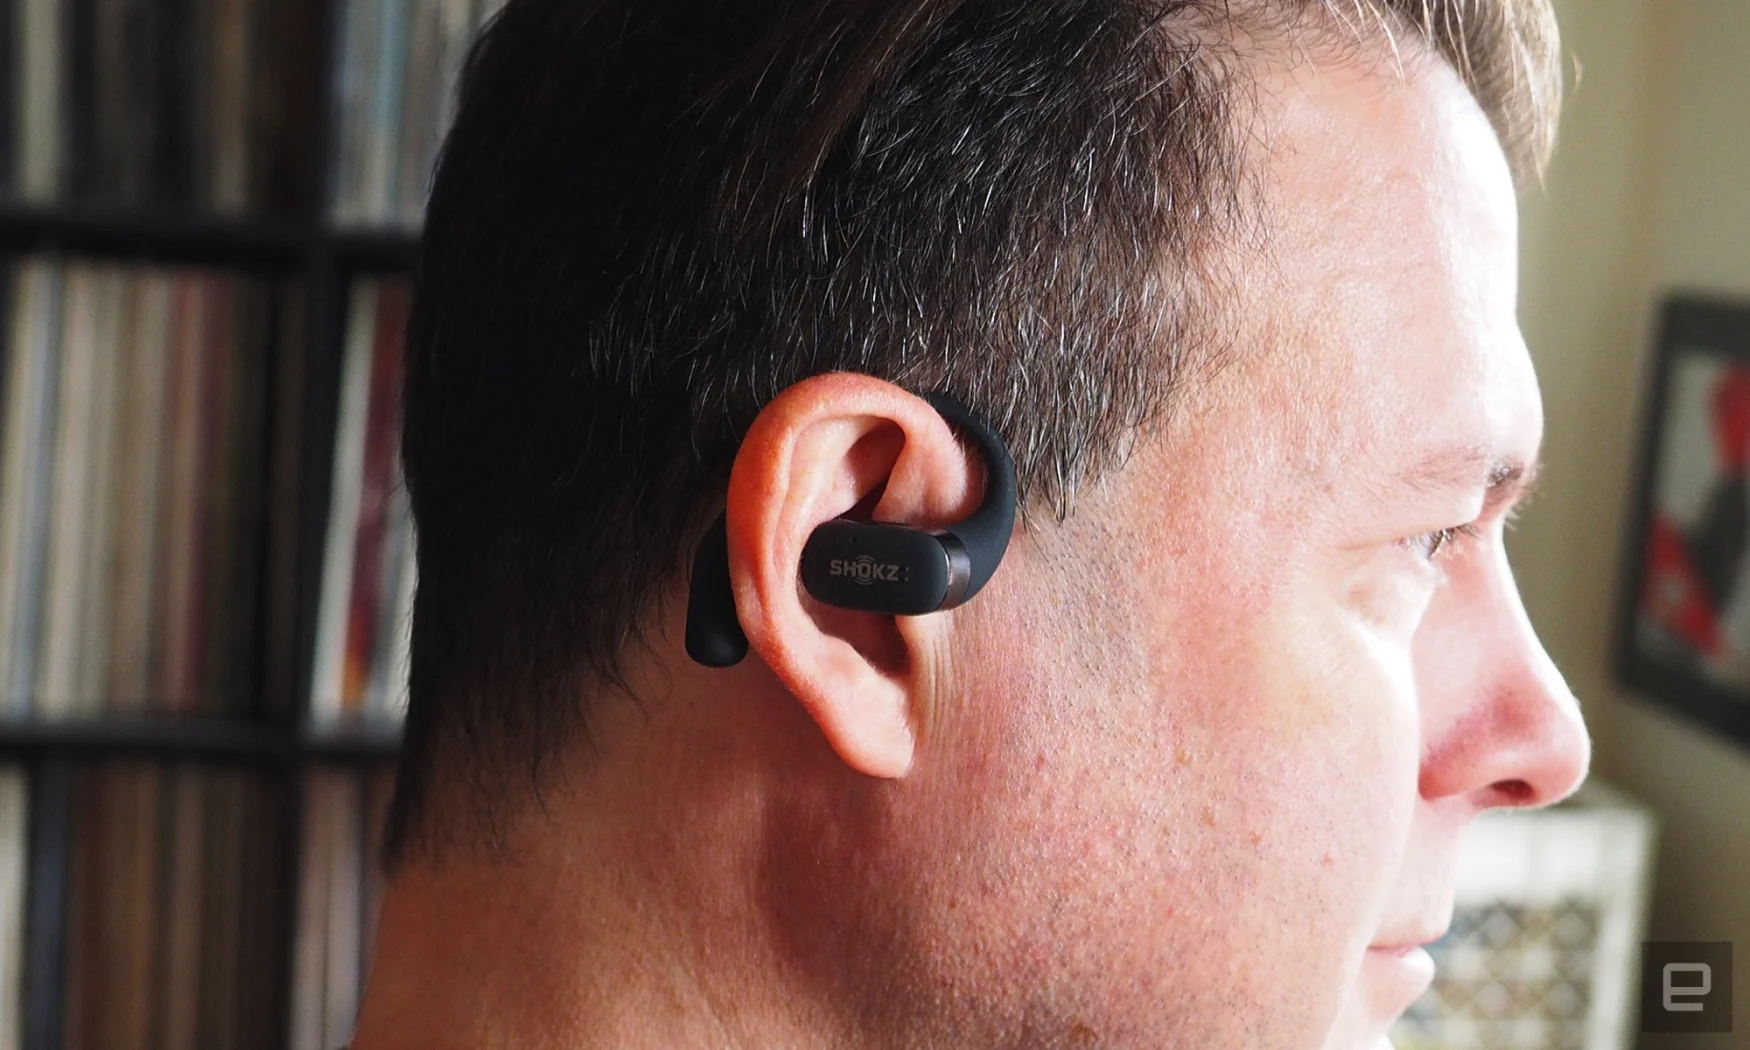 Close-up images of the Shokz OpenFit open earbuds in gray worn by a person seen in profile.